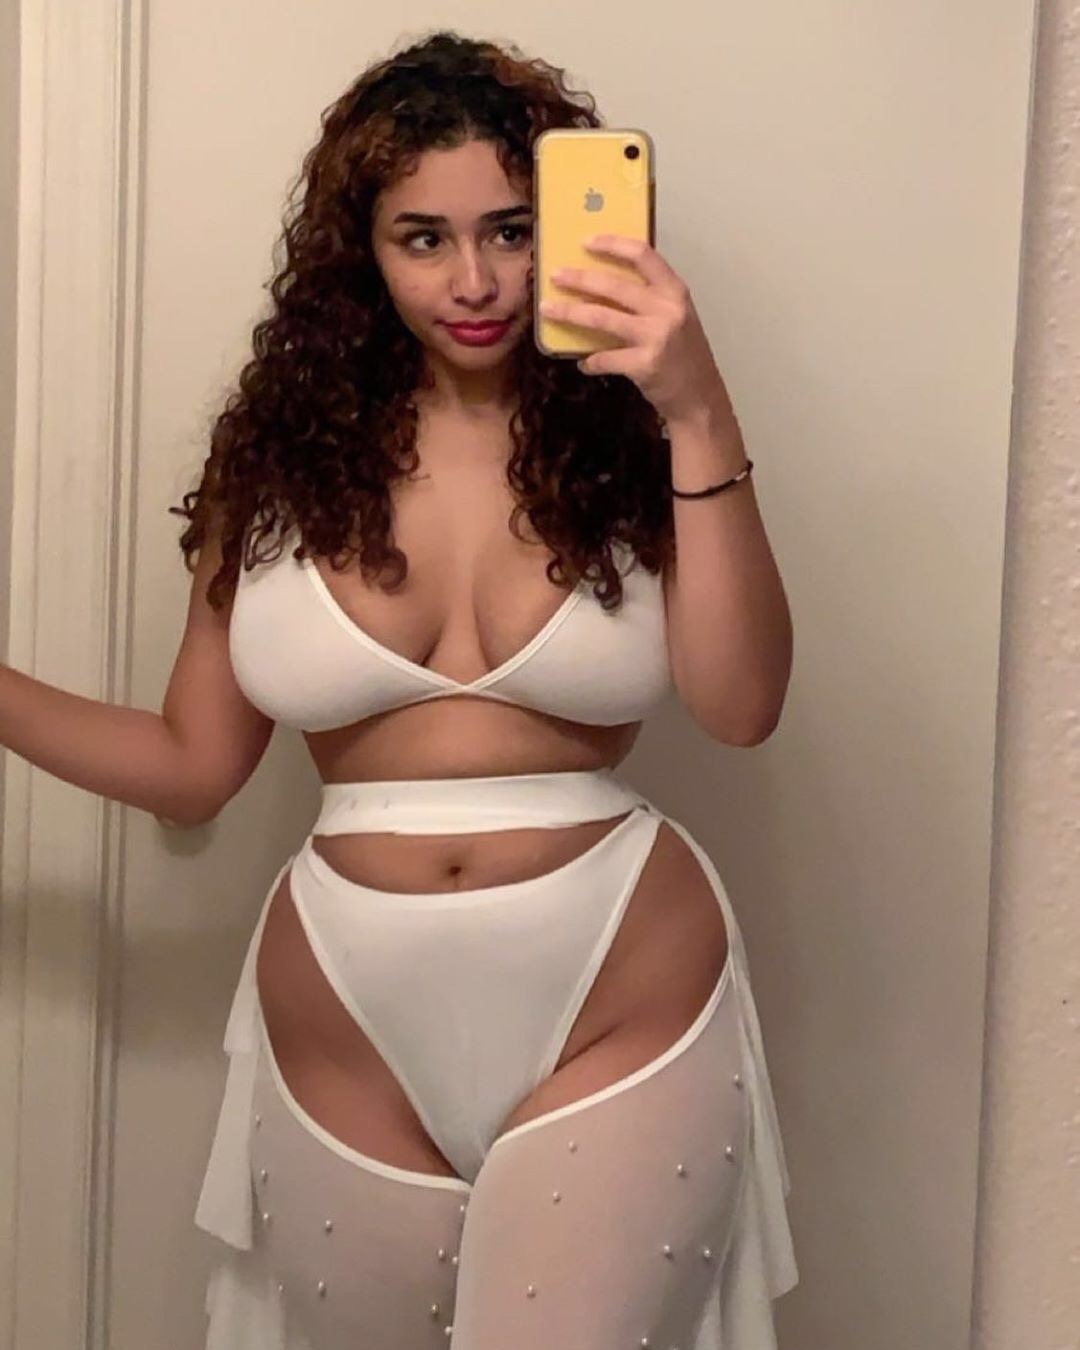 Bri Onepiece12 Nude Onlyfans Video Leaked! 